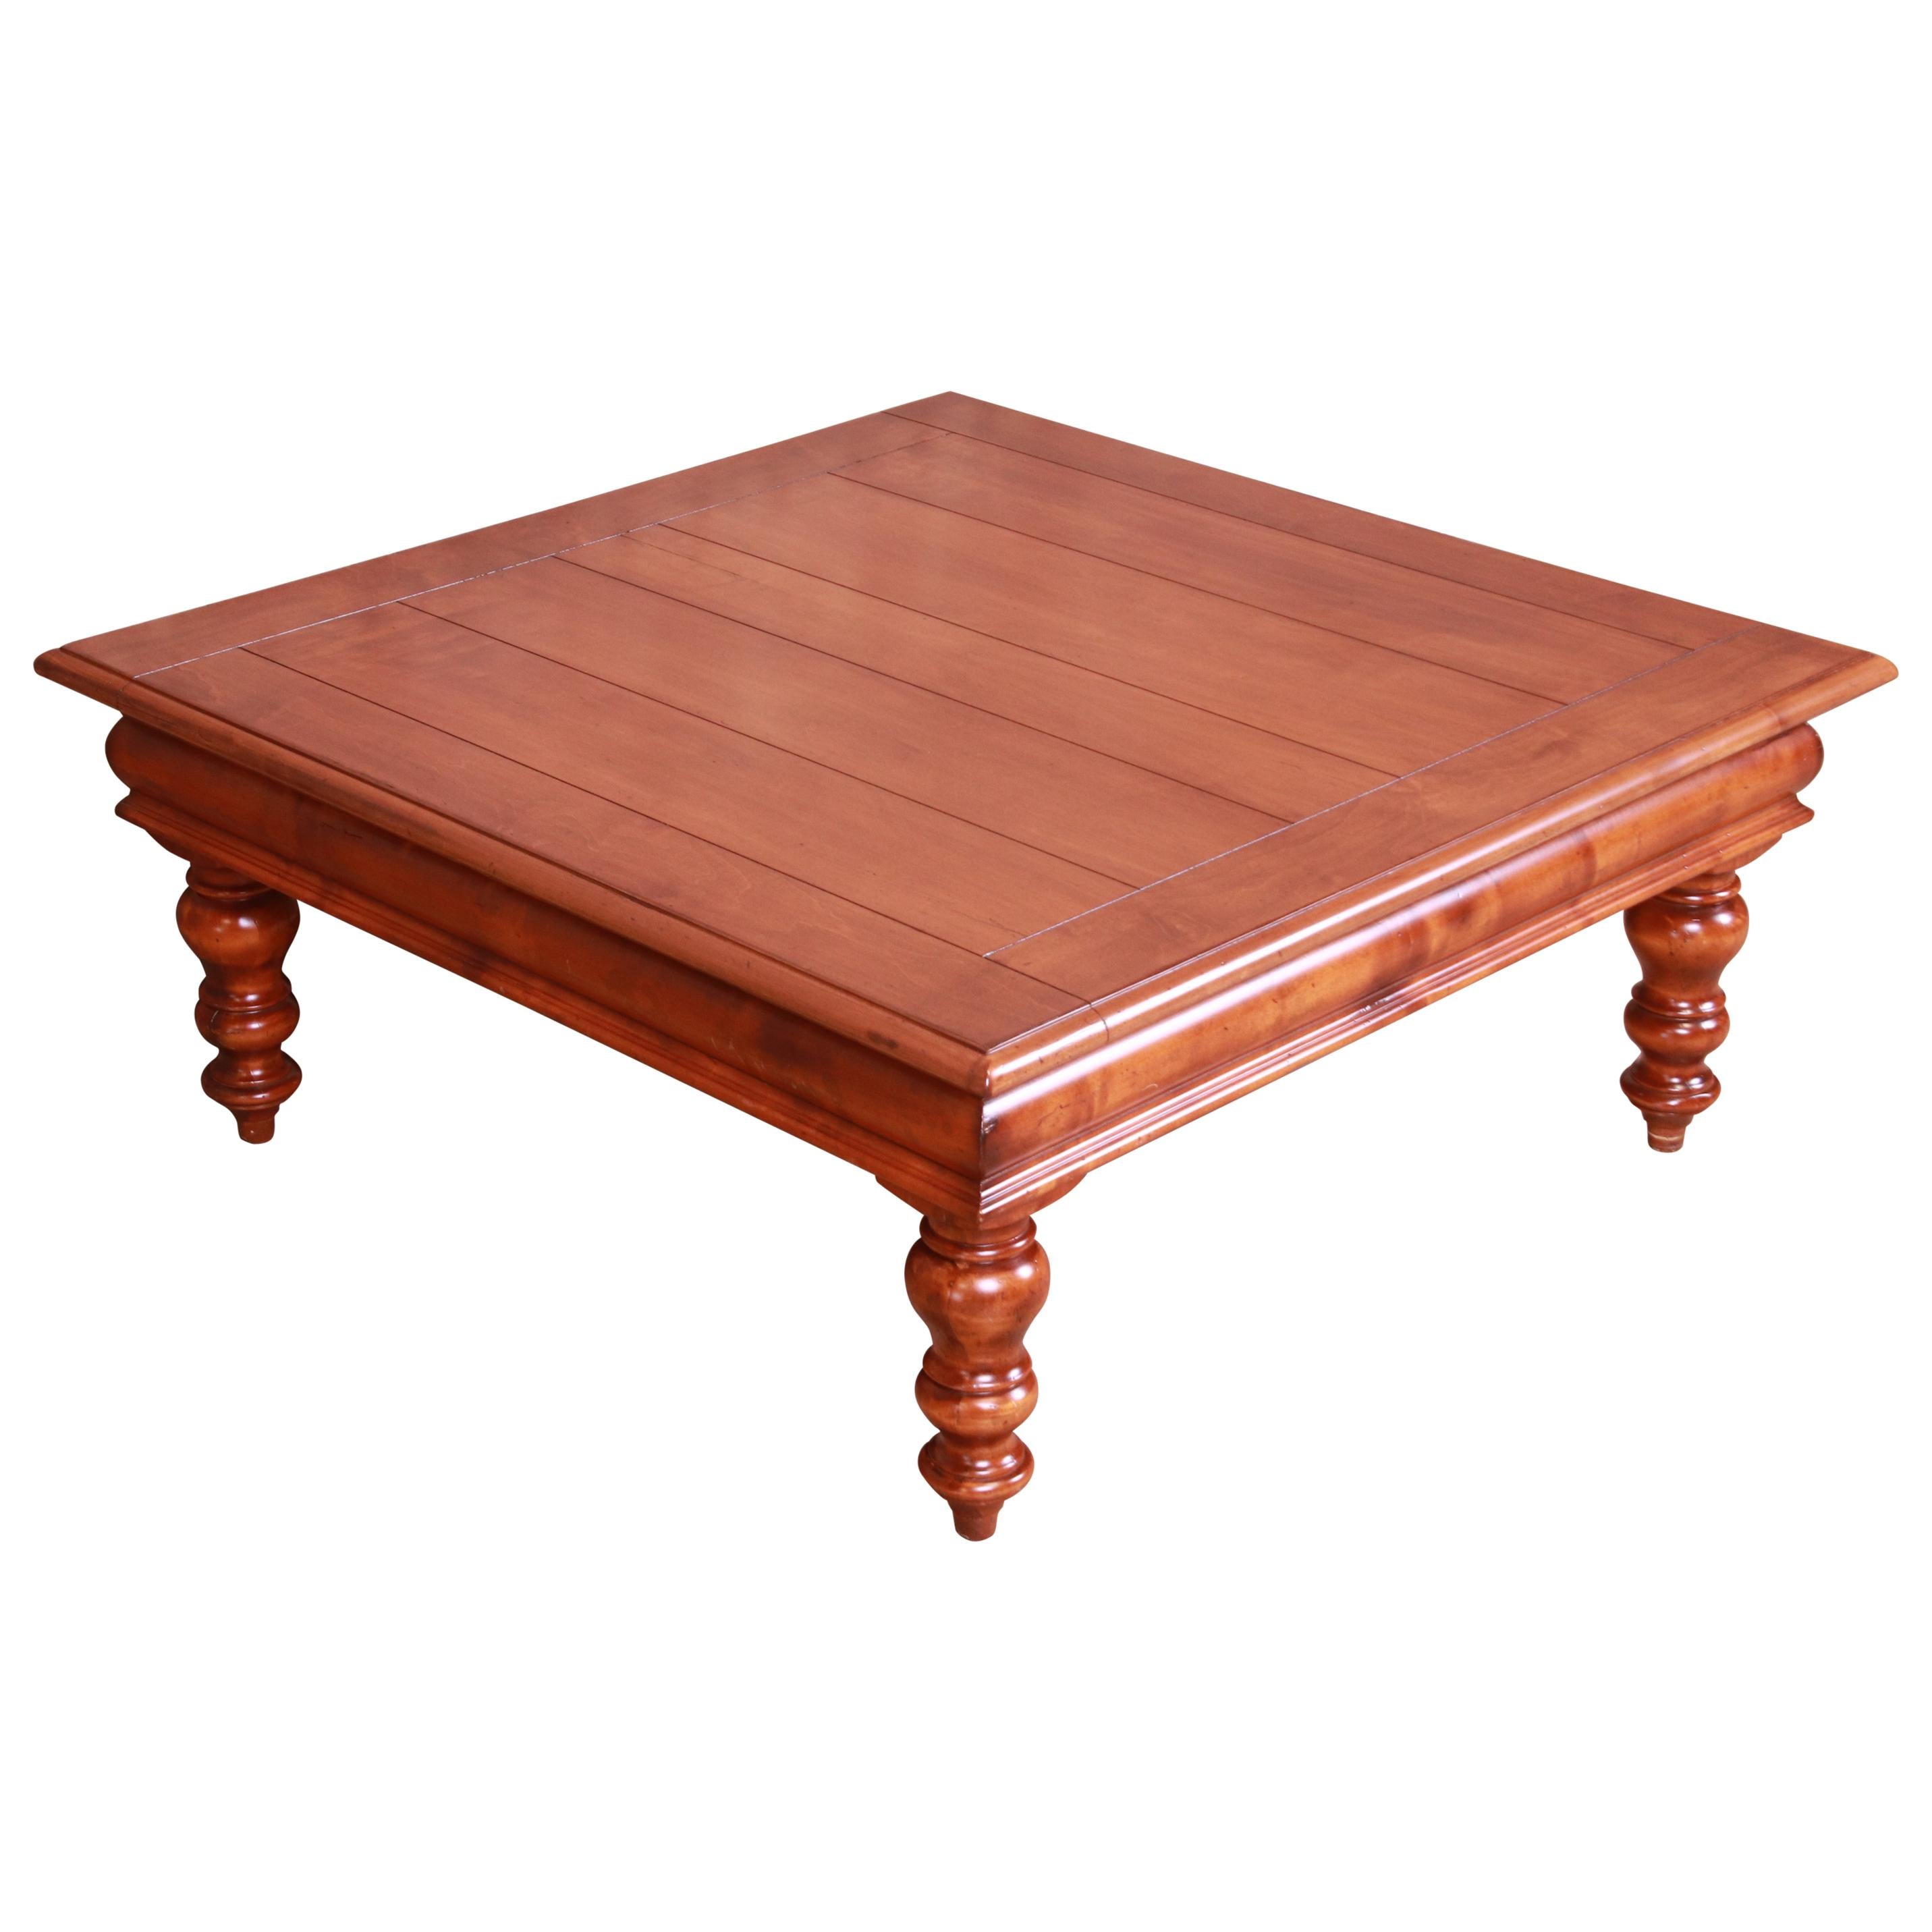 Baker Furniture Italian Provincial Maple Coffee Table, Newly Refinished